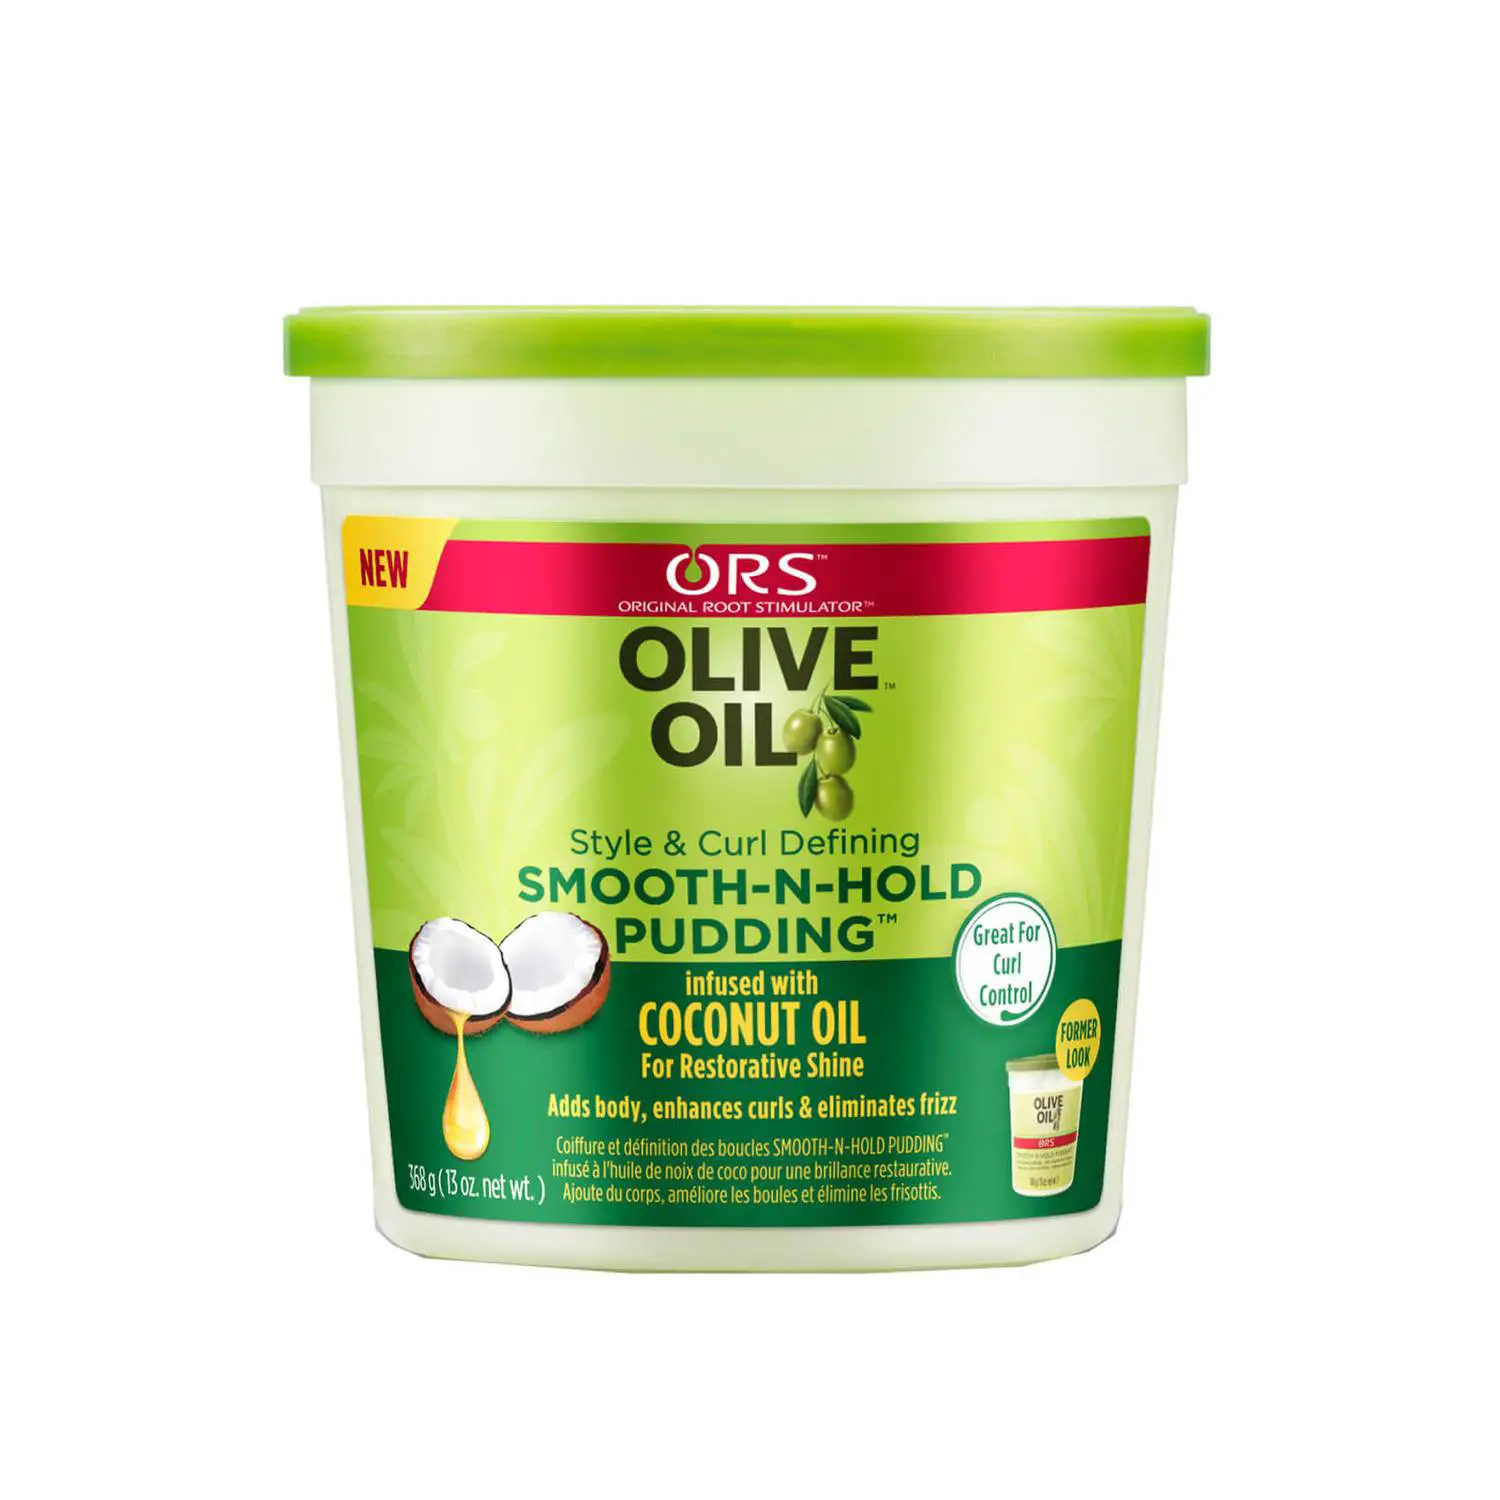 ORS Olive Oil Smooth-N-Hold pudding